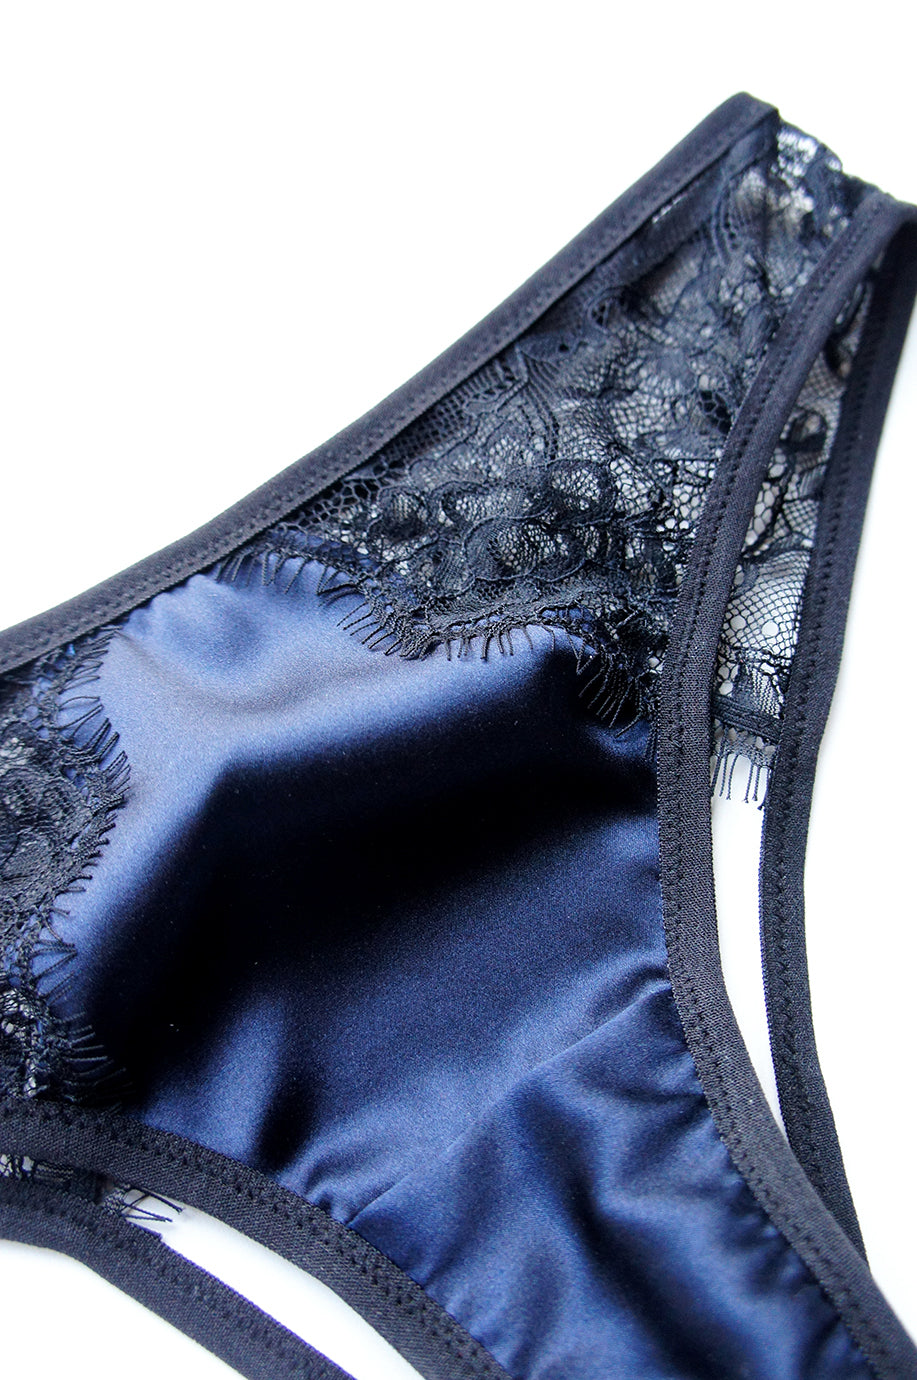 Ouvert Panty Navy and Black